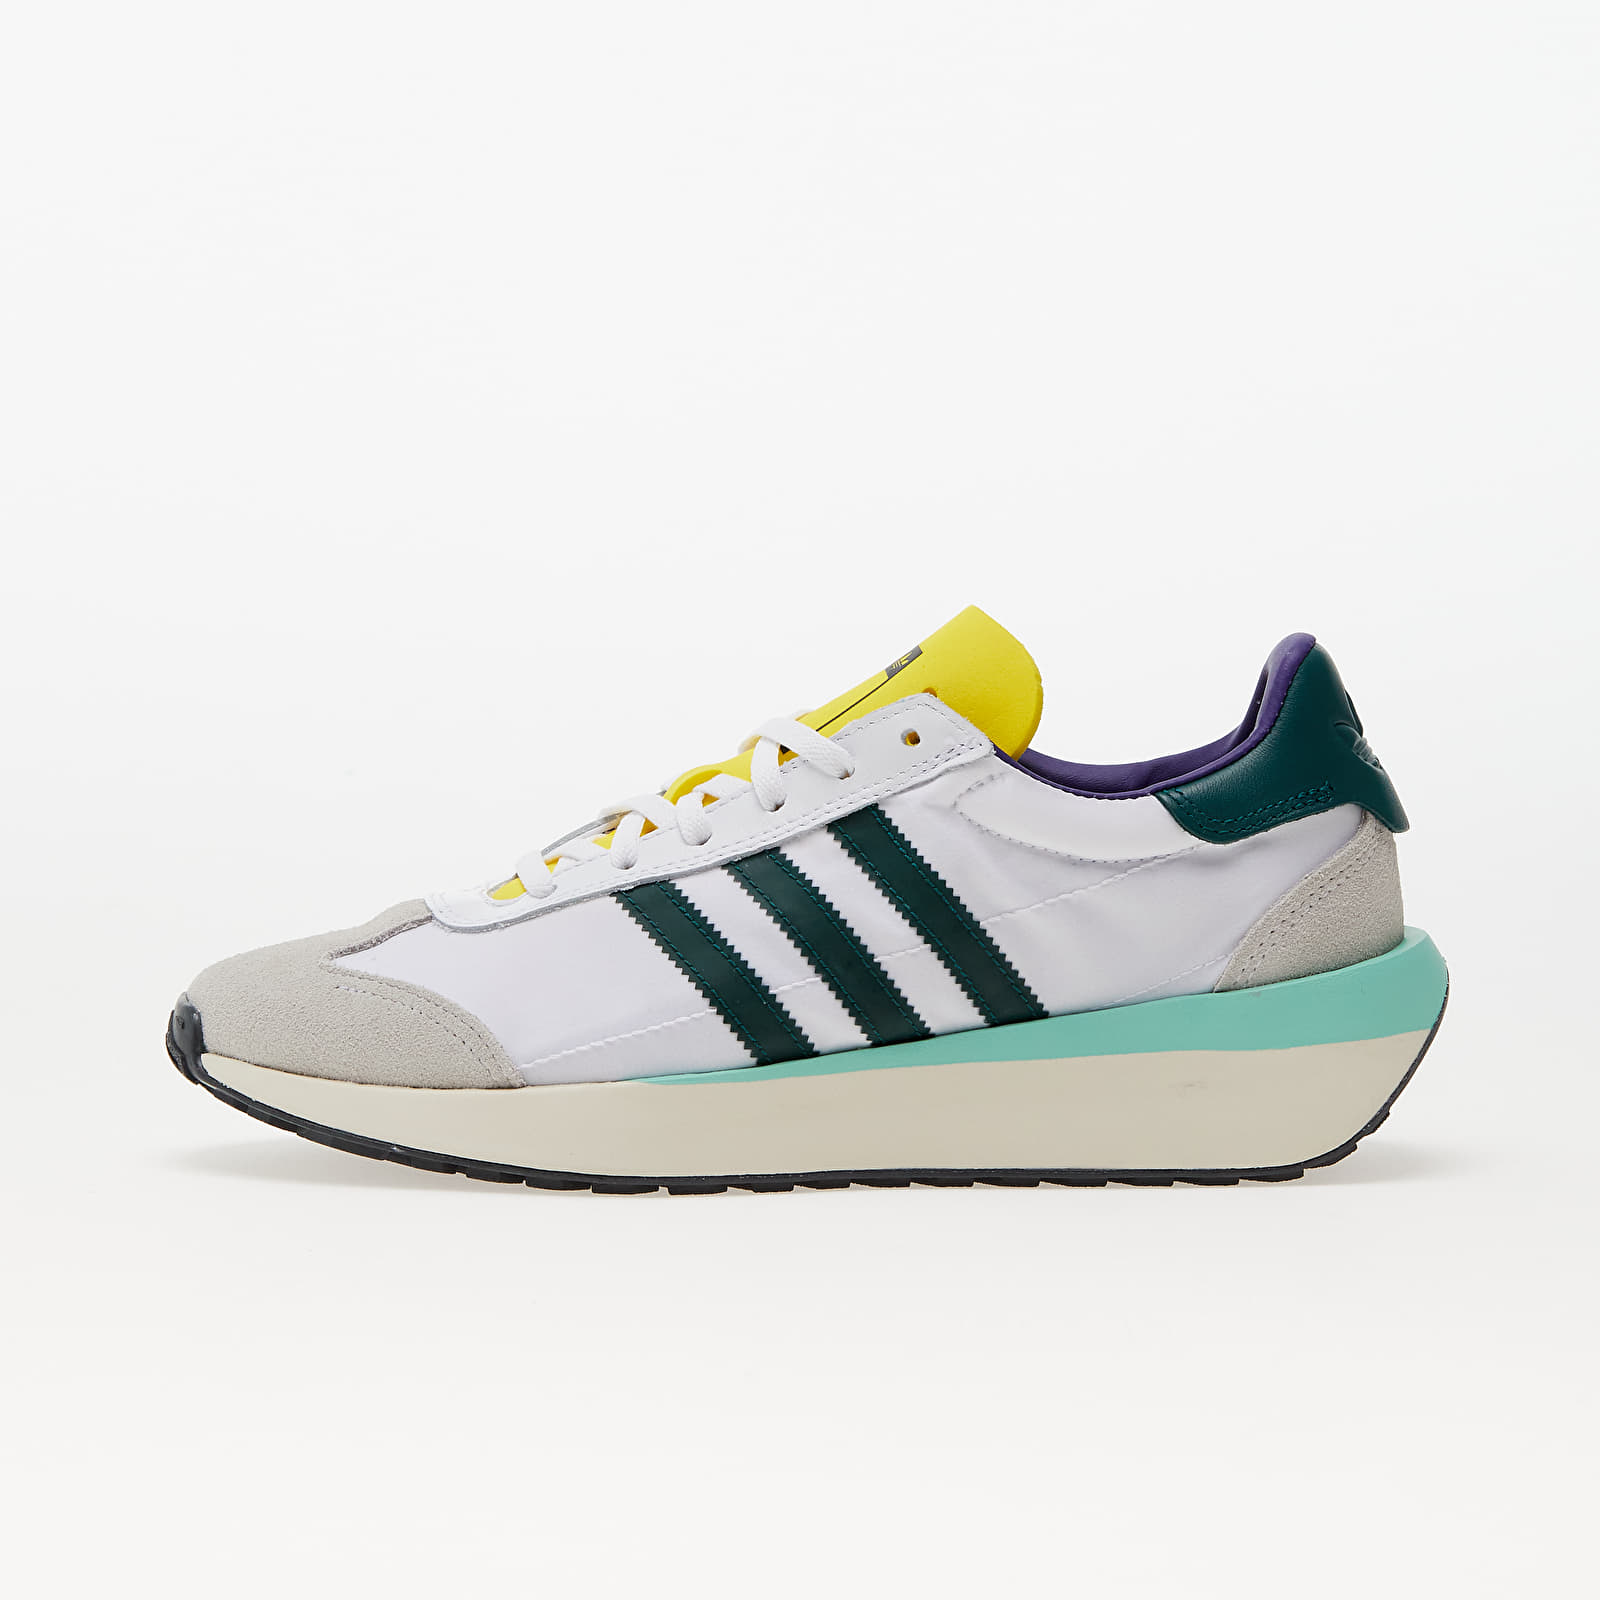 Levně adidas Country Xlg Ftw White/ Collegiate Green/ Yellow